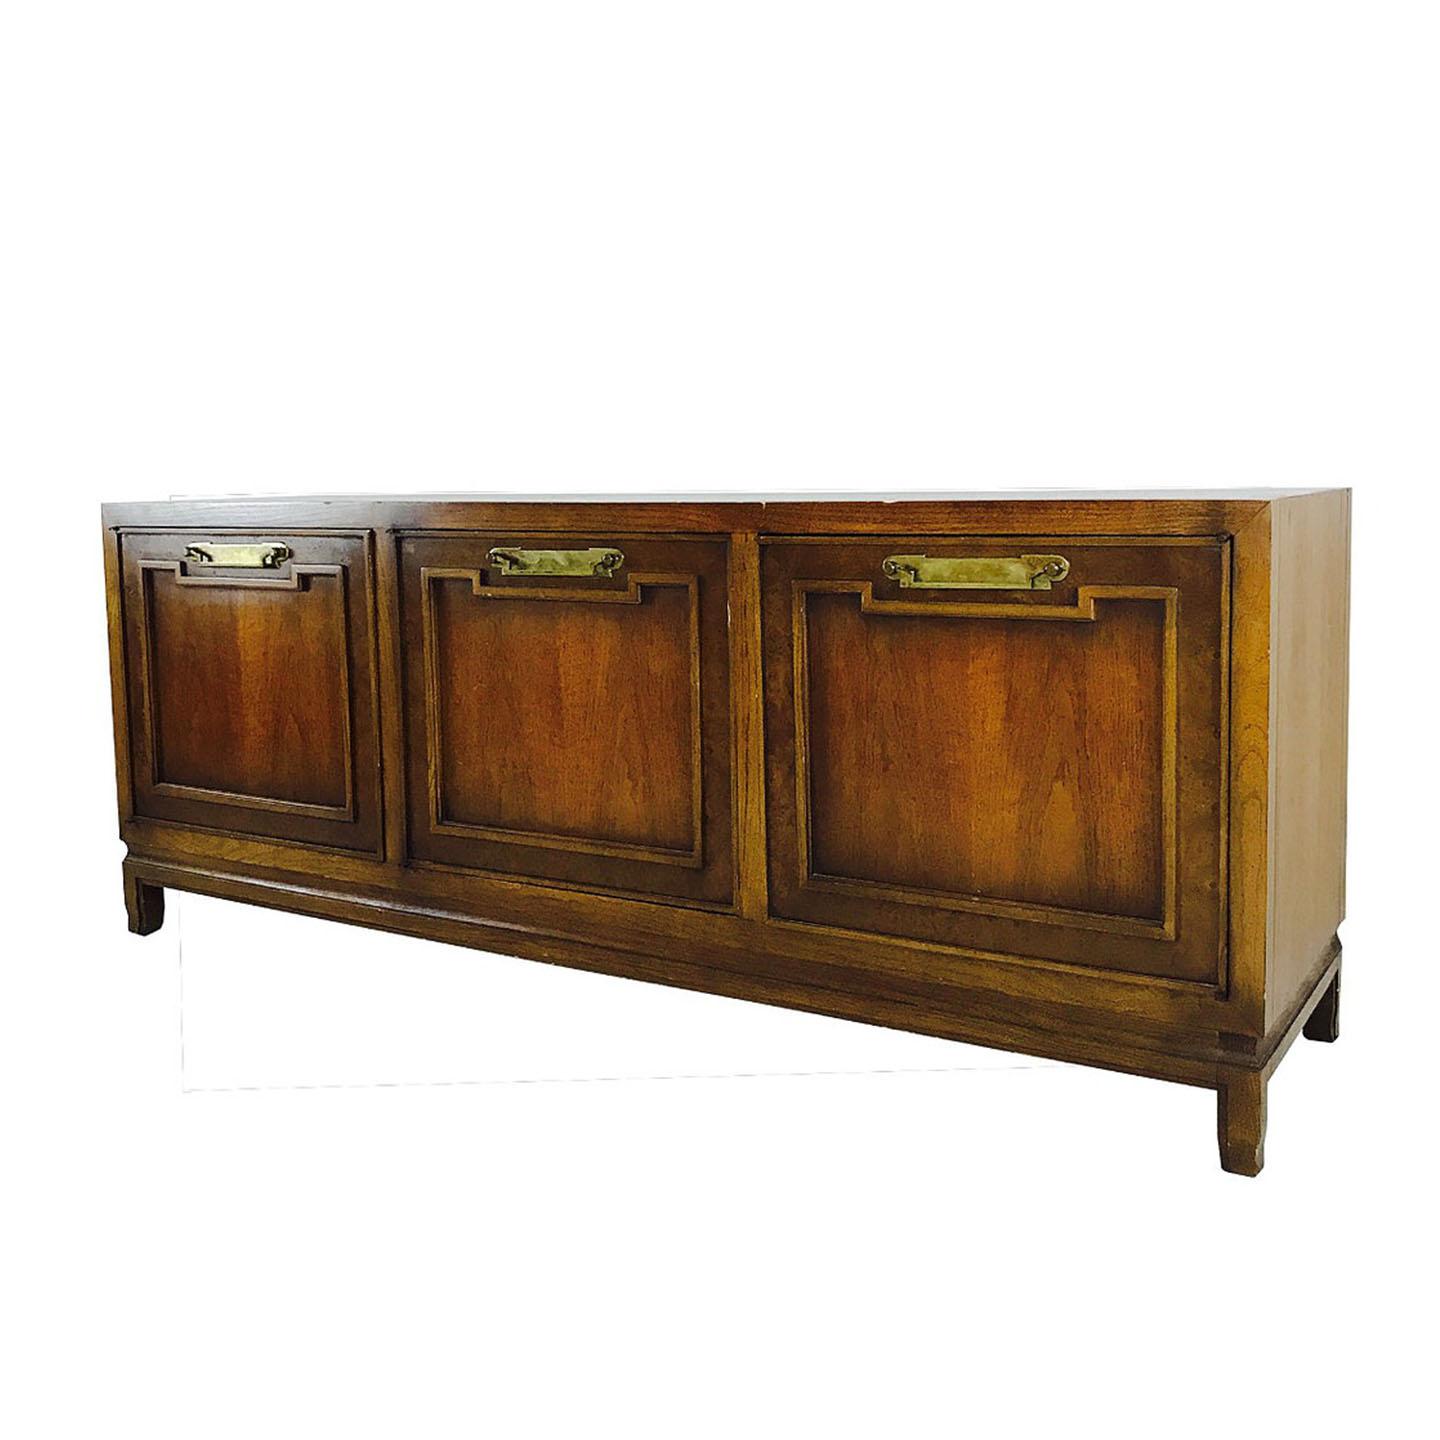 MCM Credenza with Brass Hardware in the Style of Thomasville